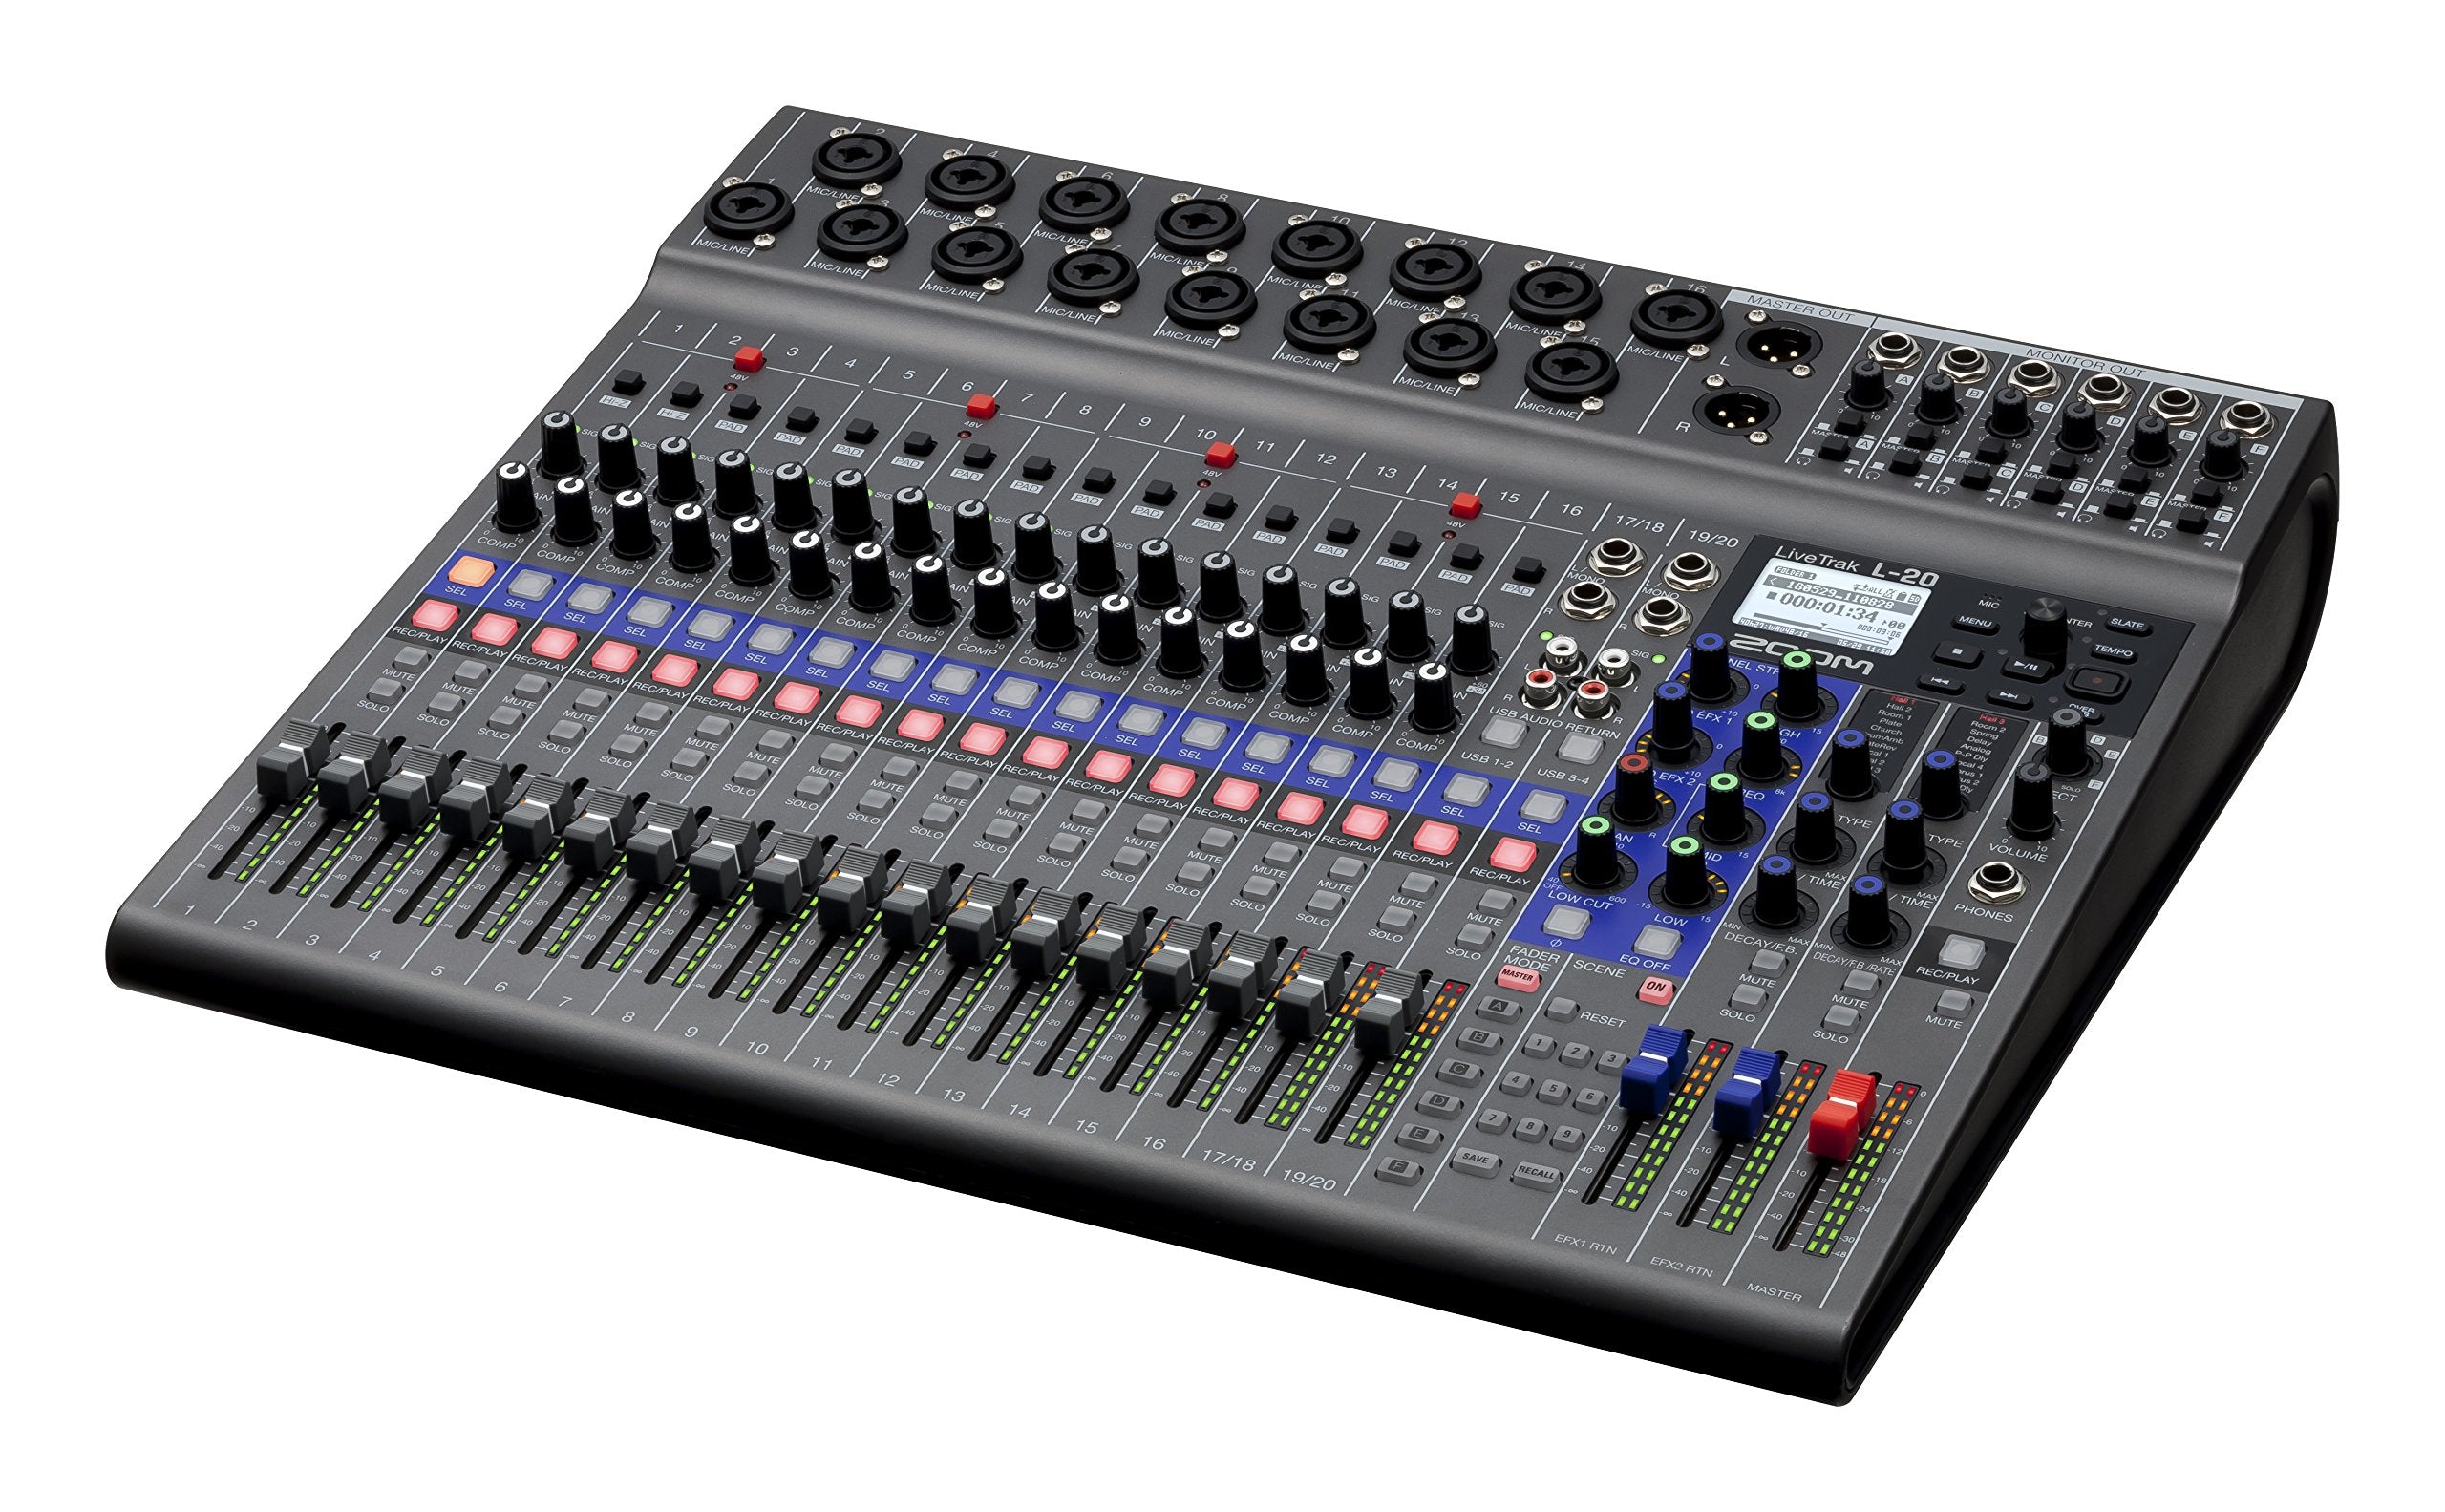 Zoom LiveTrak L-20 Digital Mixer & Multitrack Recorder, 20-Input/ 22-Channel SD Card Recorder, 22-in/4-out USB Audio Interface, 6 Customizable Outputs, Wireless iOS Control